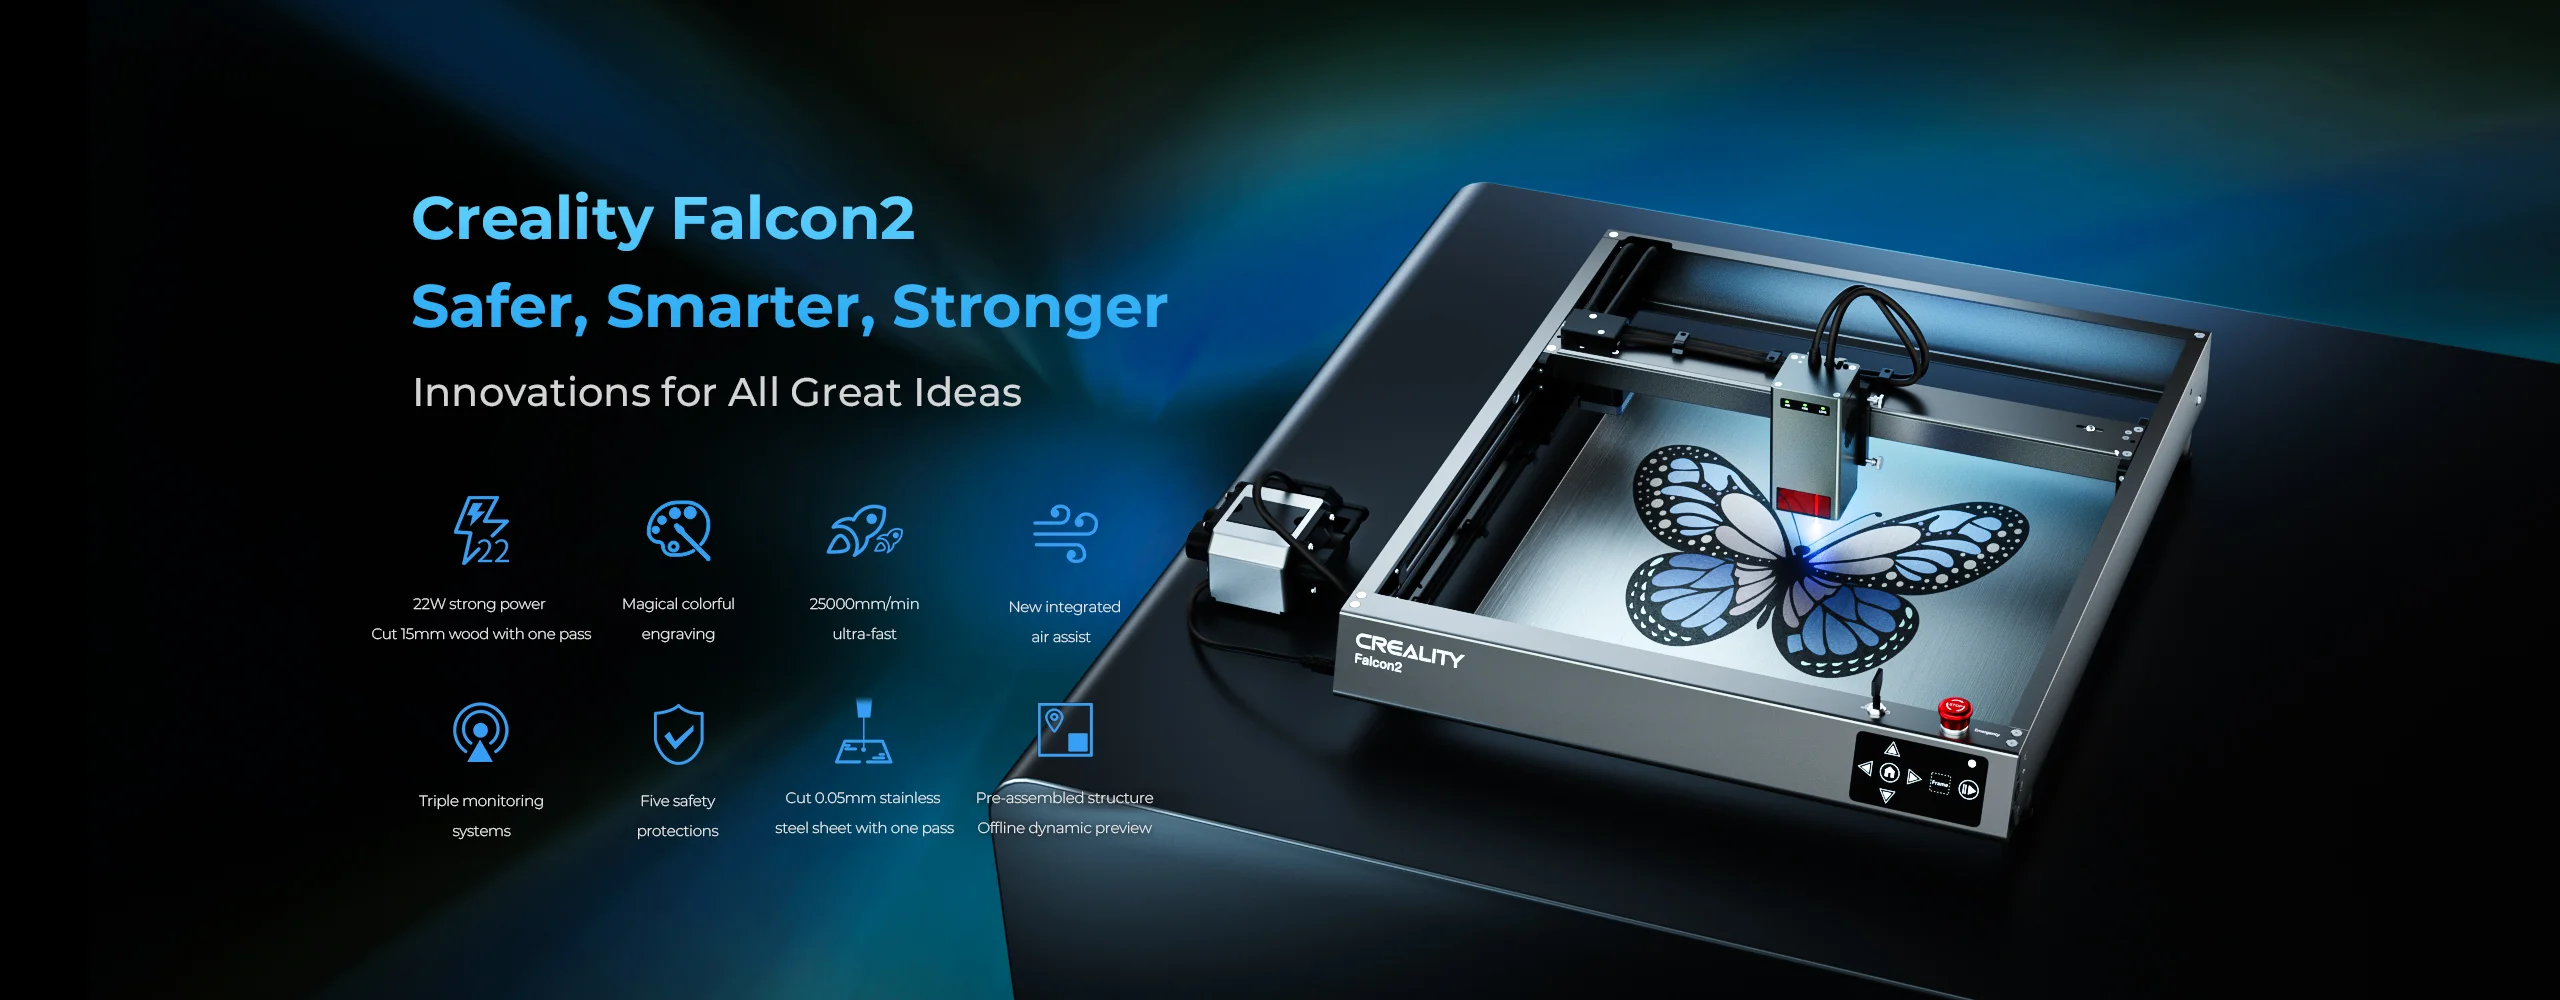 Creality Falcon 2: Powerful Laser Engraver for Wood and Metal -  TechnicalTrendy